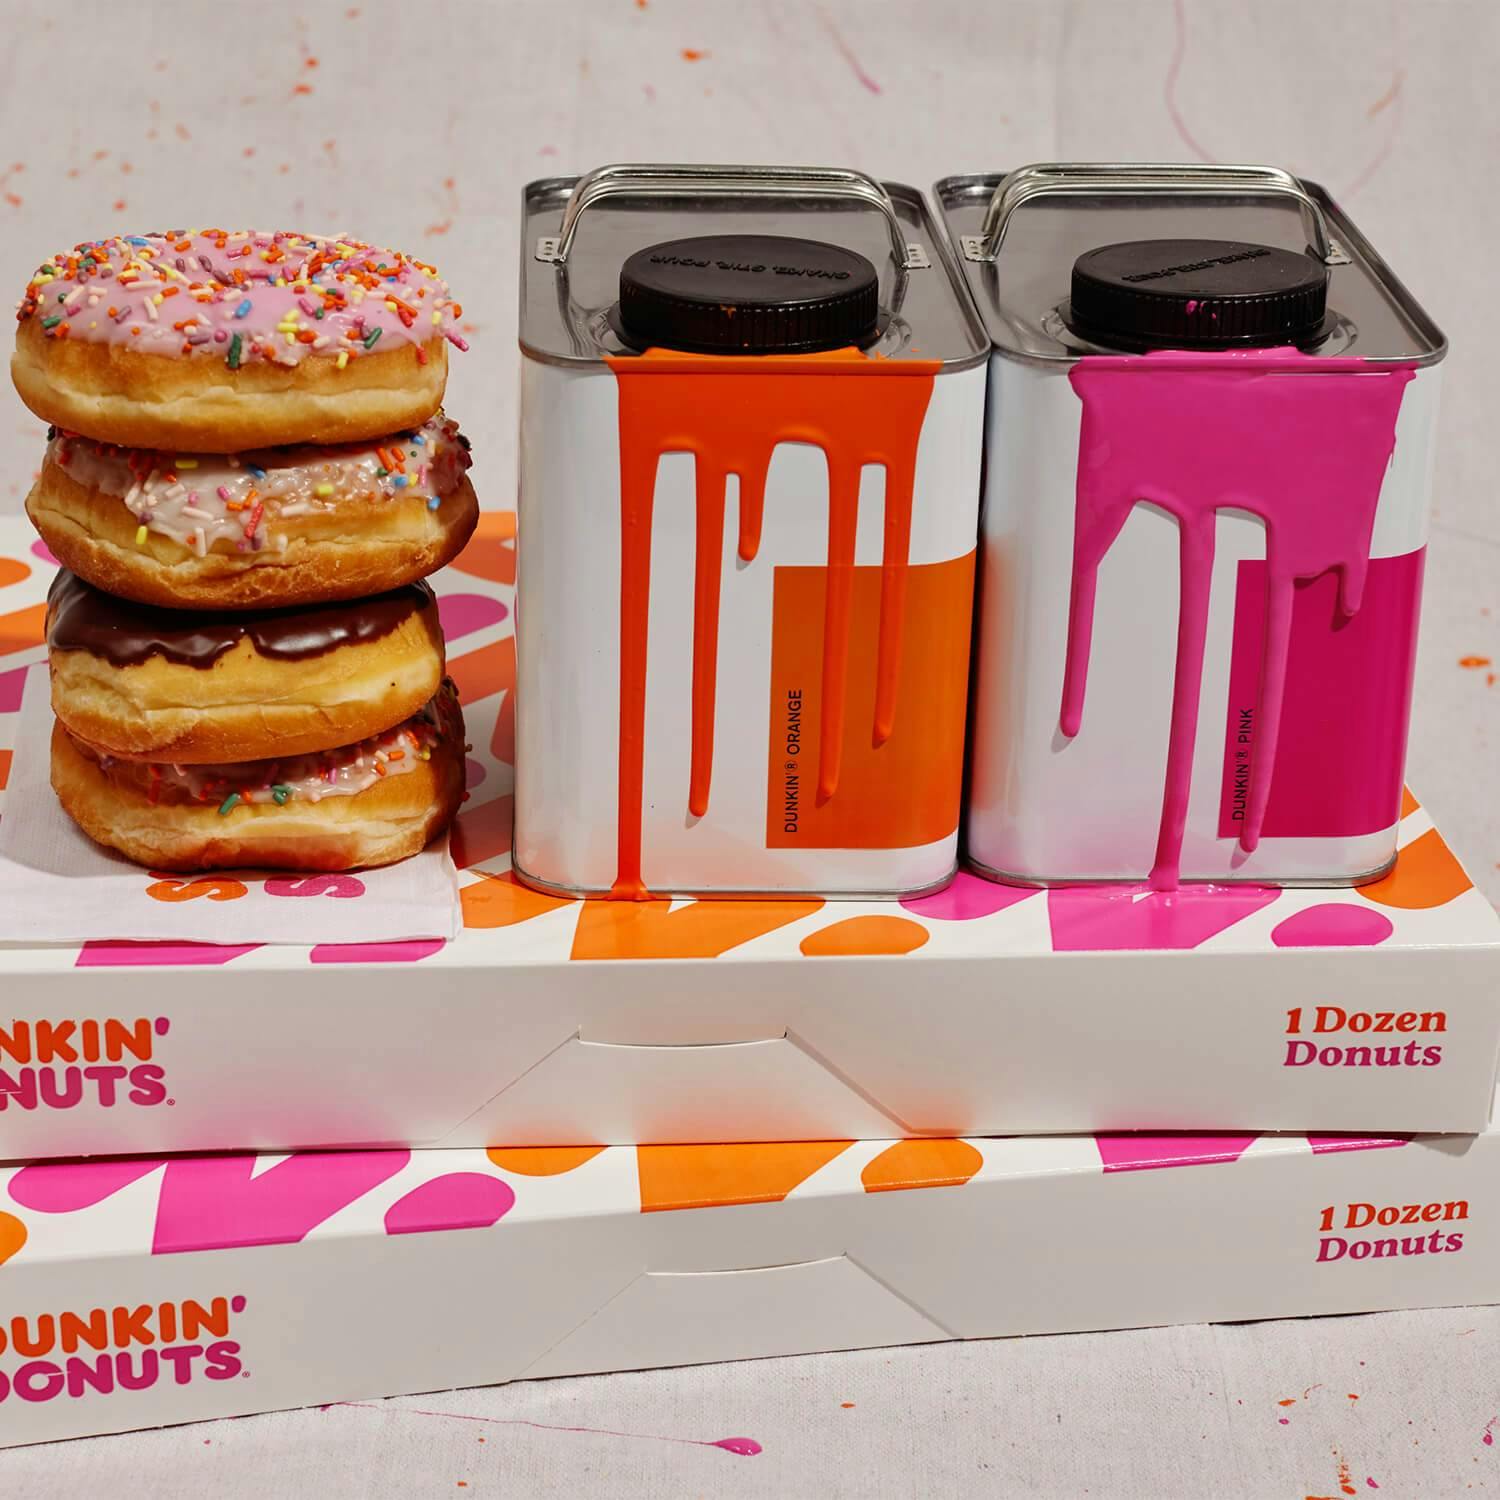 Paint cans next to a stack of donuts on top of two donut boxes